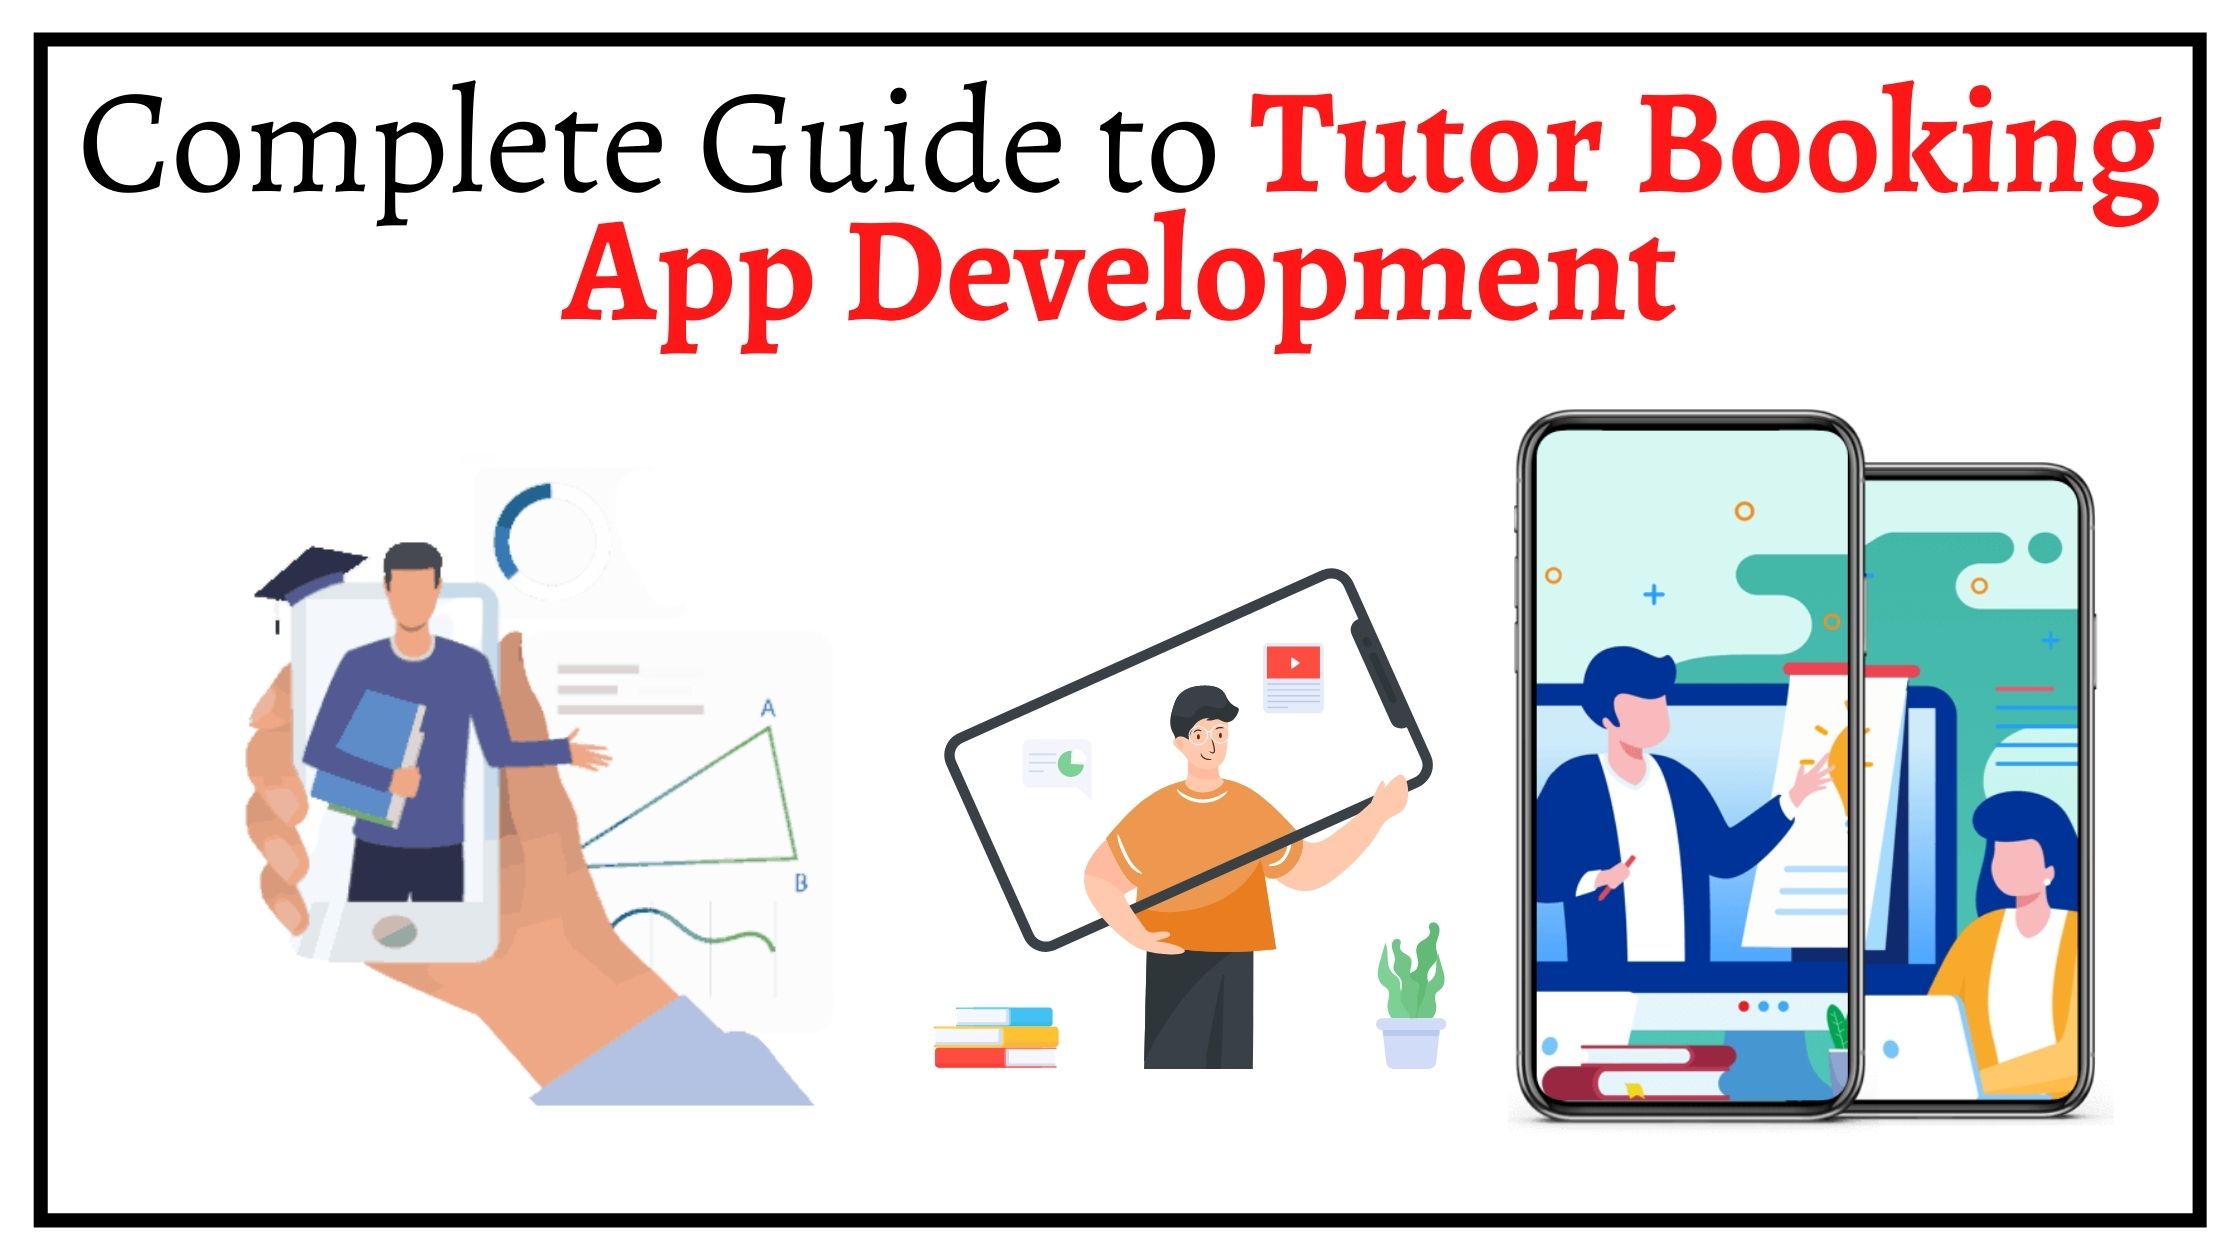 Complete Guide to Tutor Booking App Development